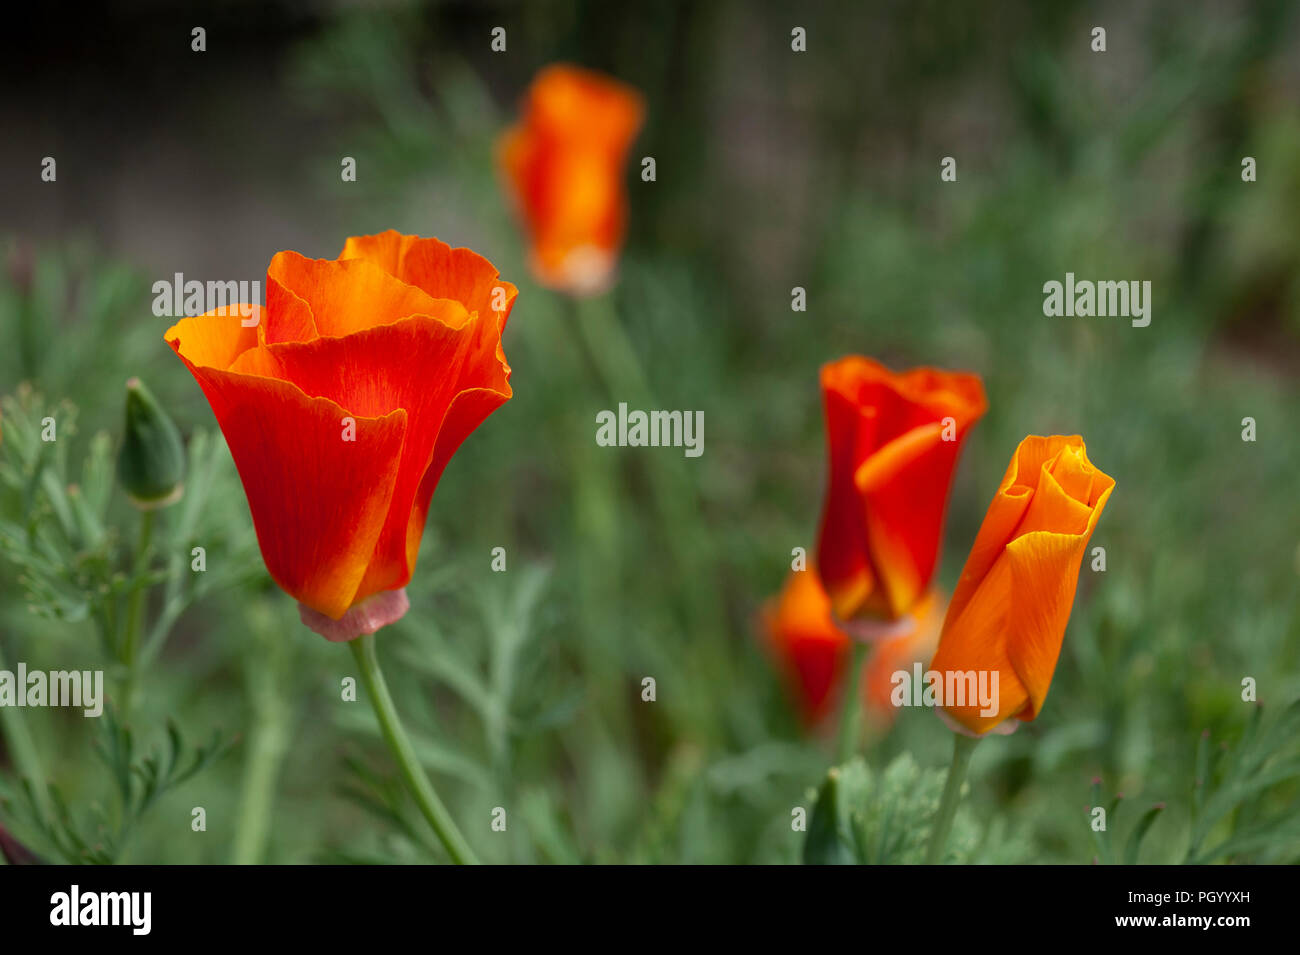 California poppies, the California State flower, in bloom. Stock Photo